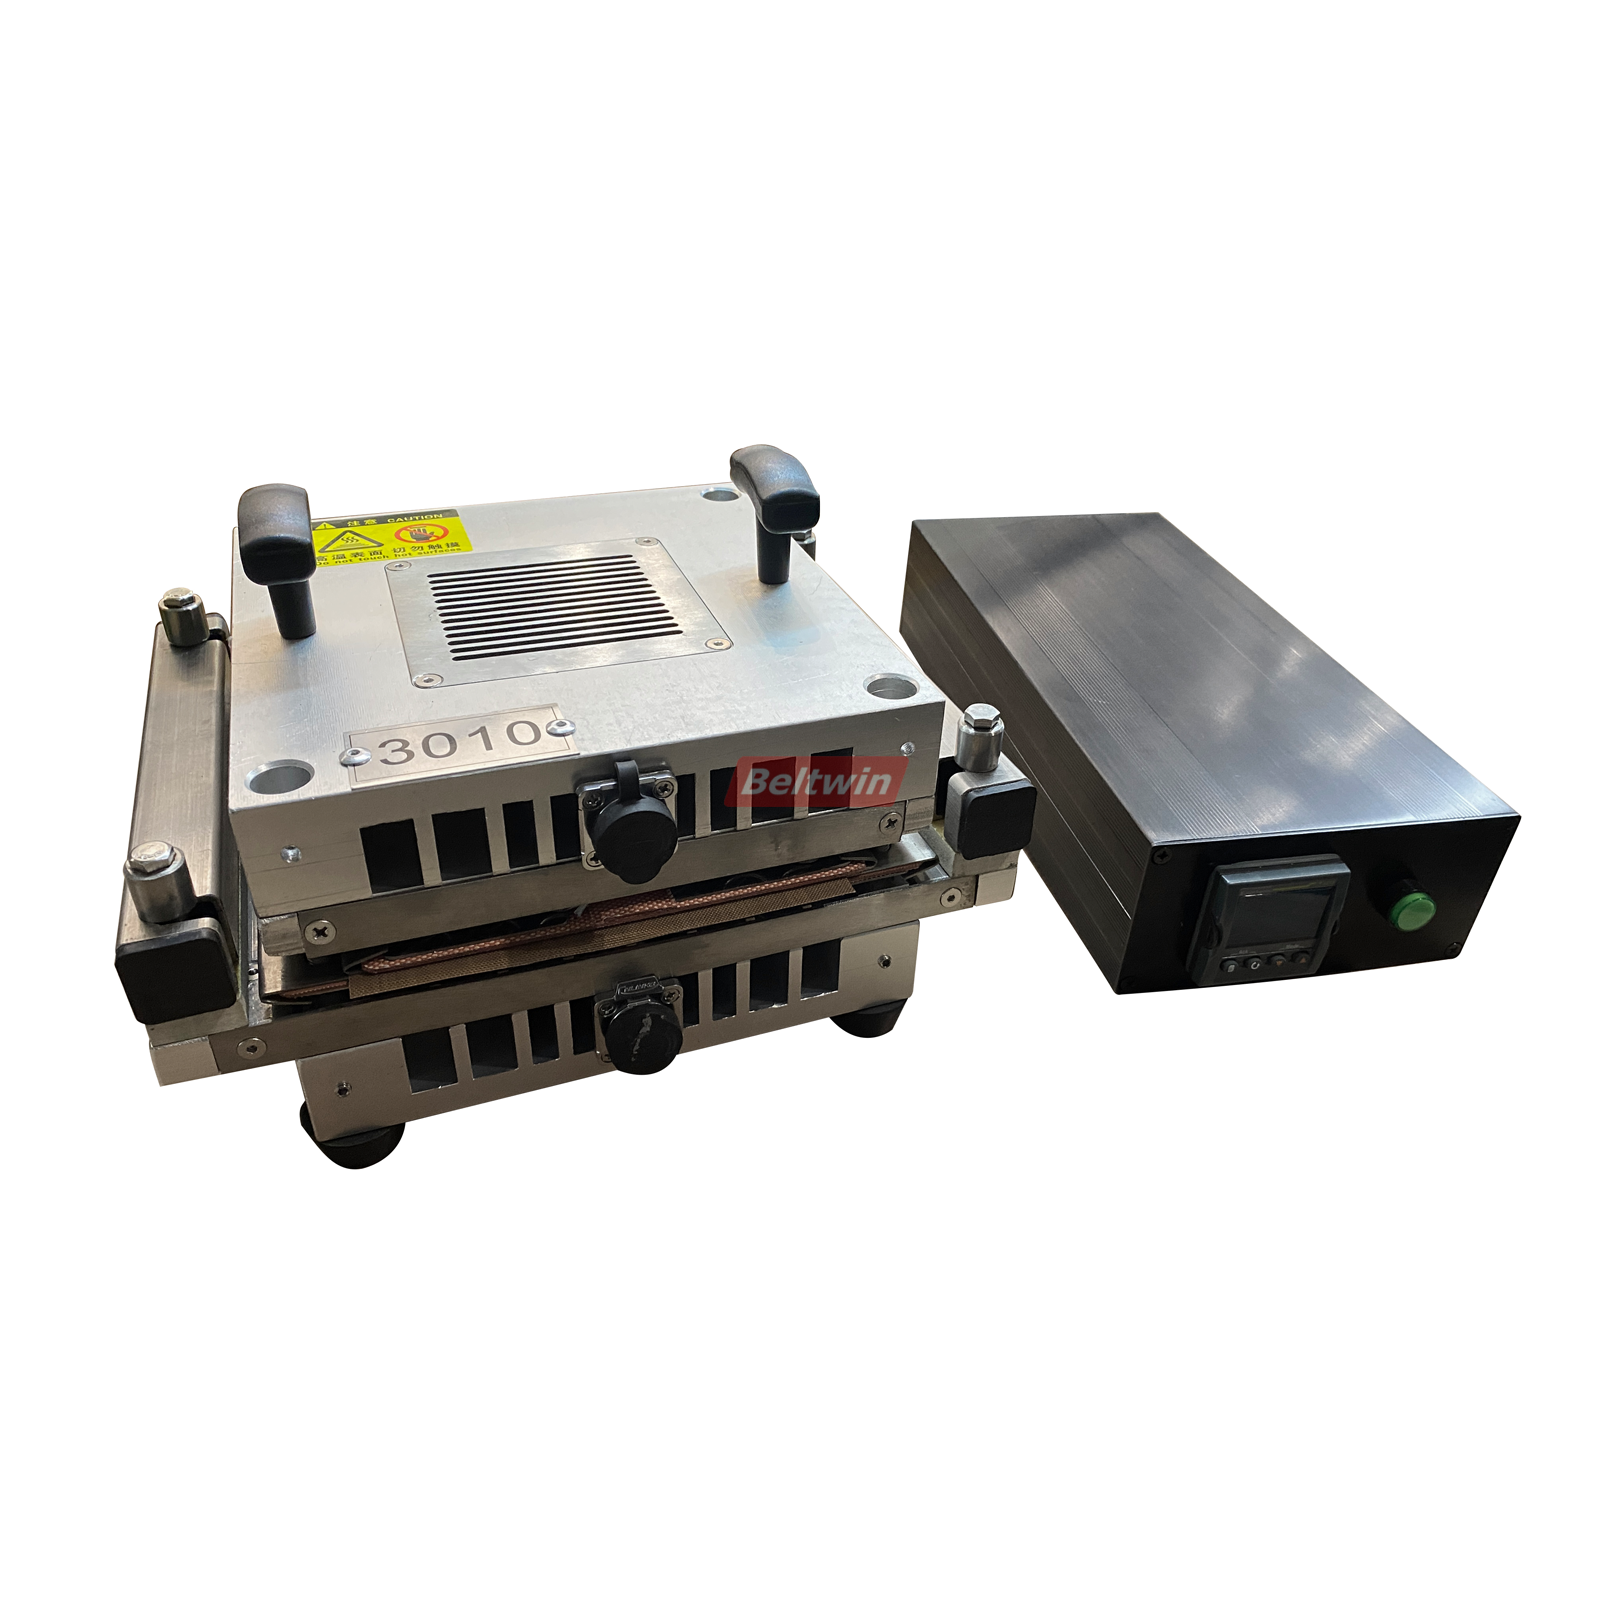 Beltwin Small Air Cooling Press